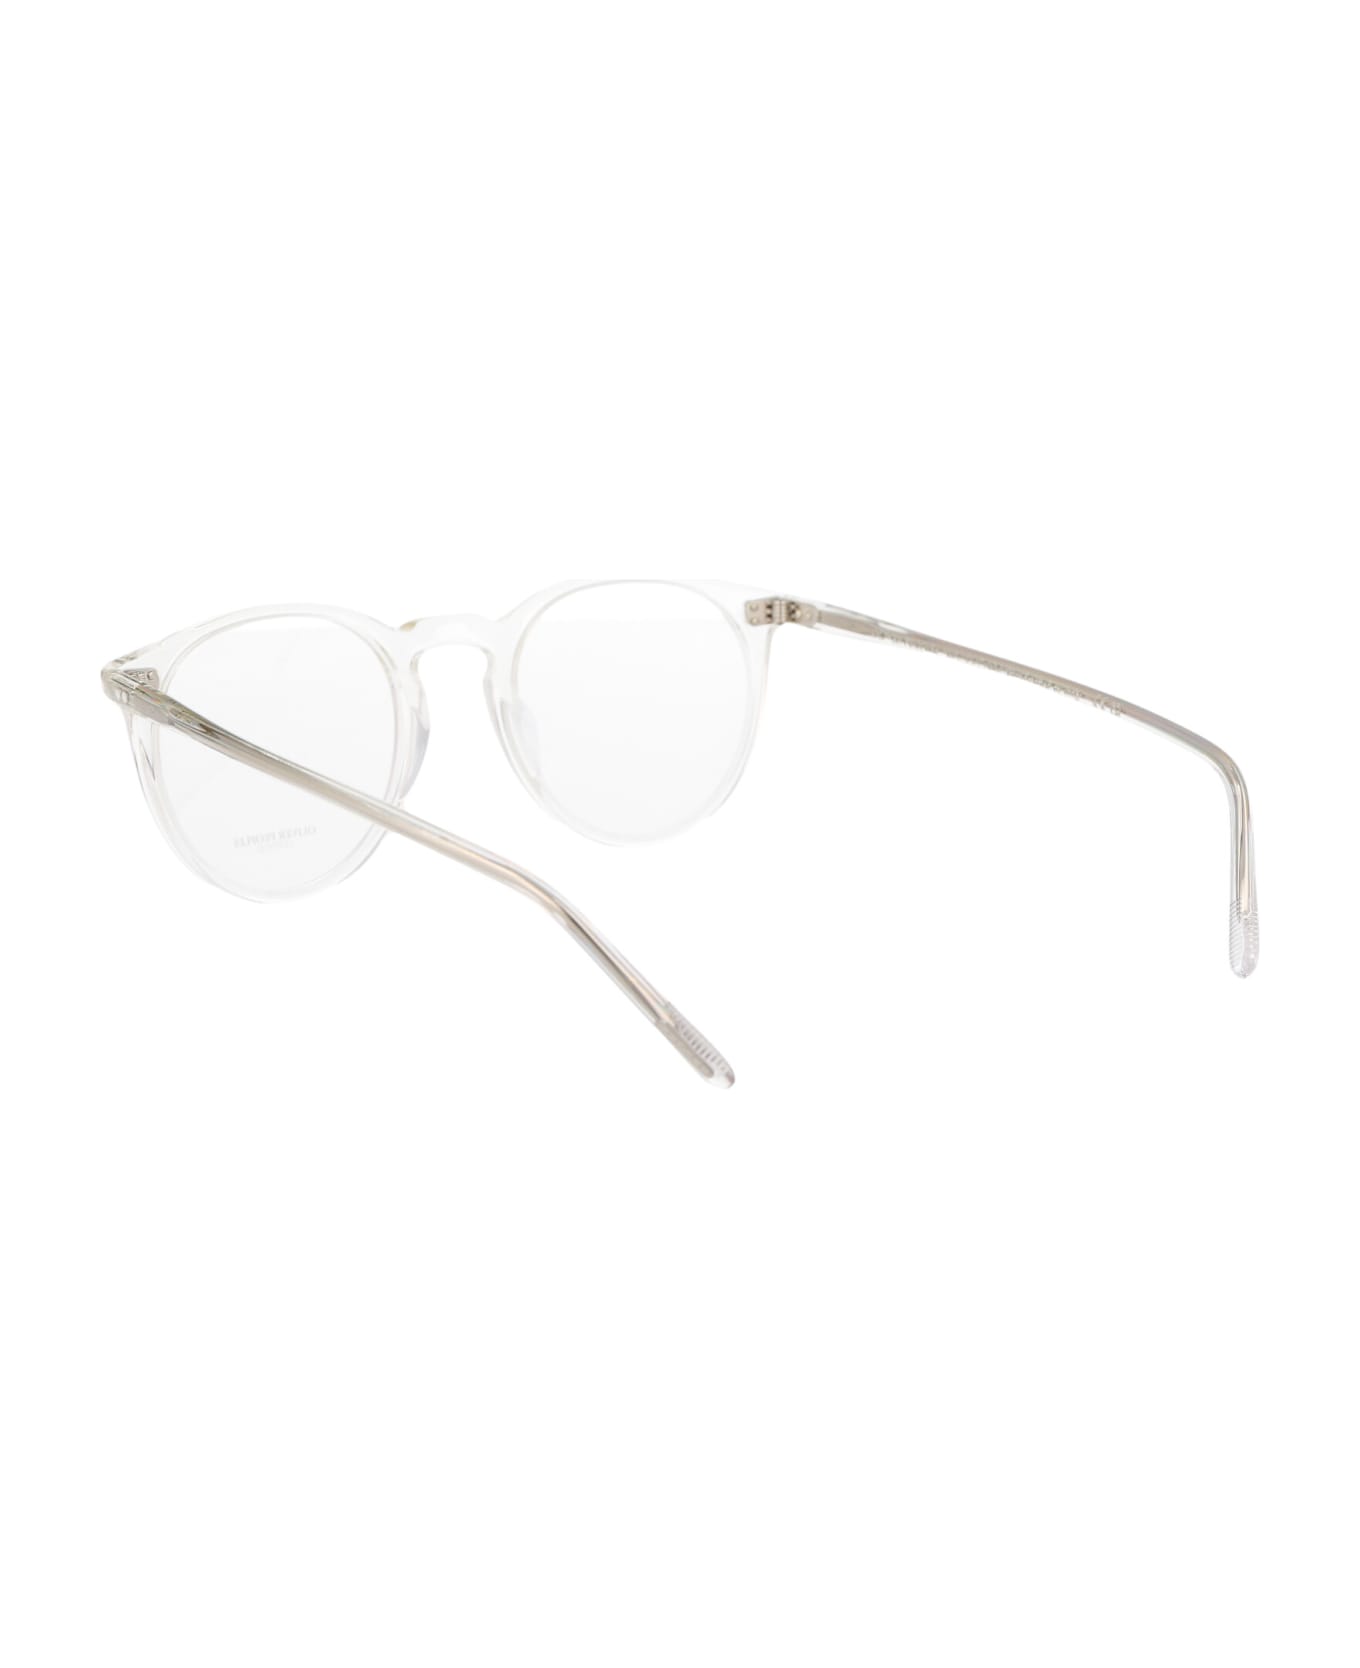 Oliver Peoples O'malley Glasses - 1755 Buff/Crystal Gradient アイウェア